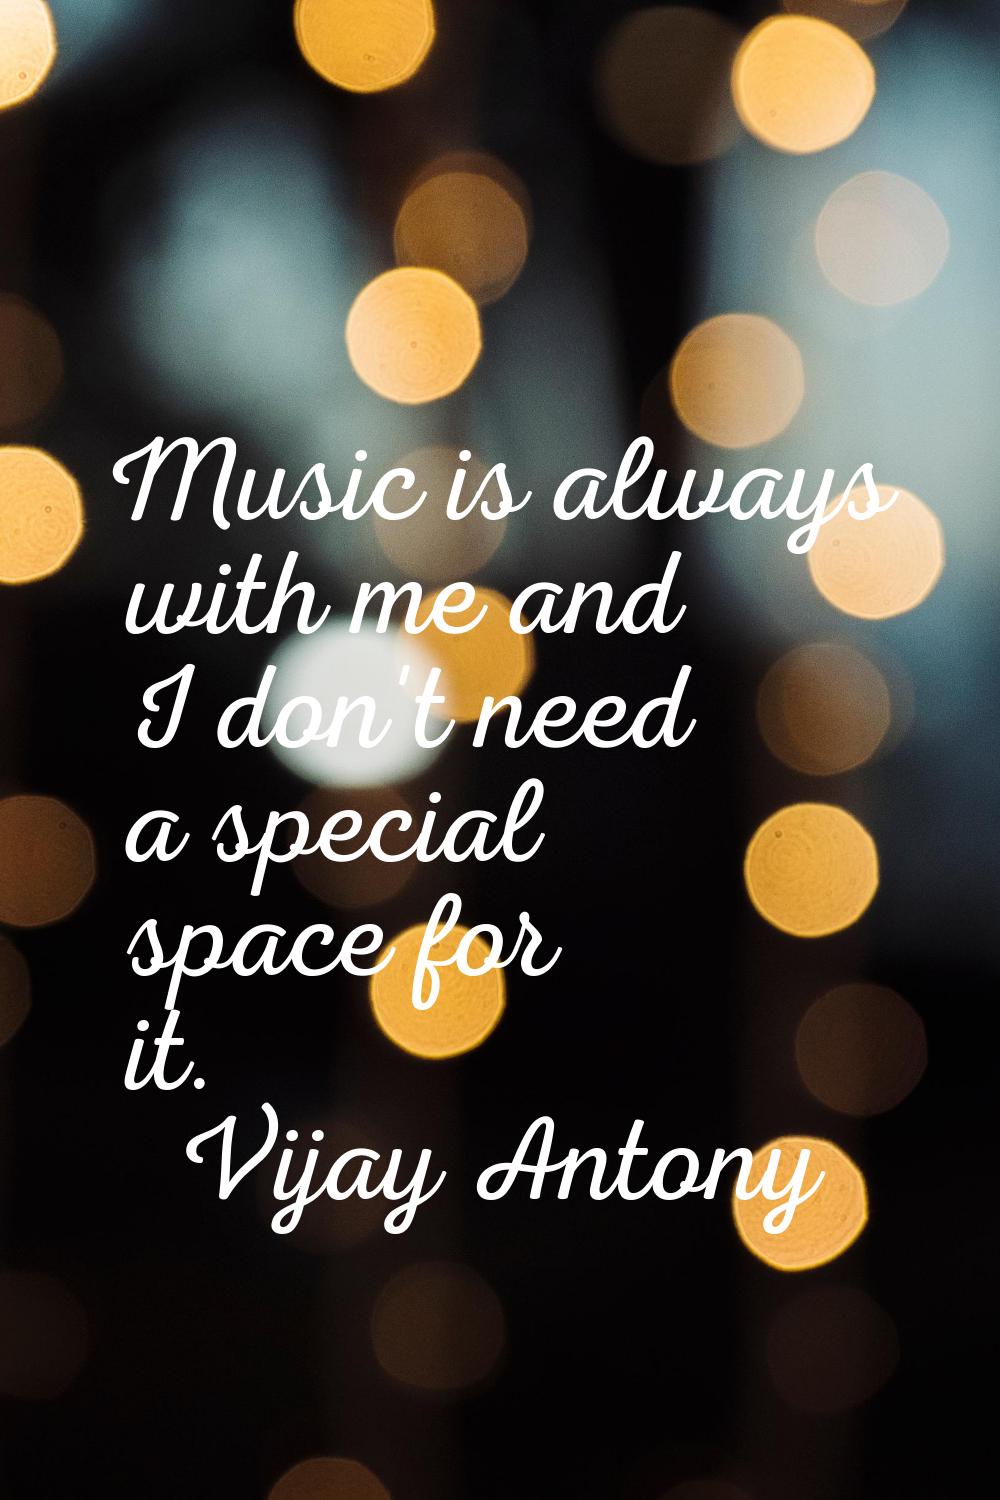 Music is always with me and I don't need a special space for it.